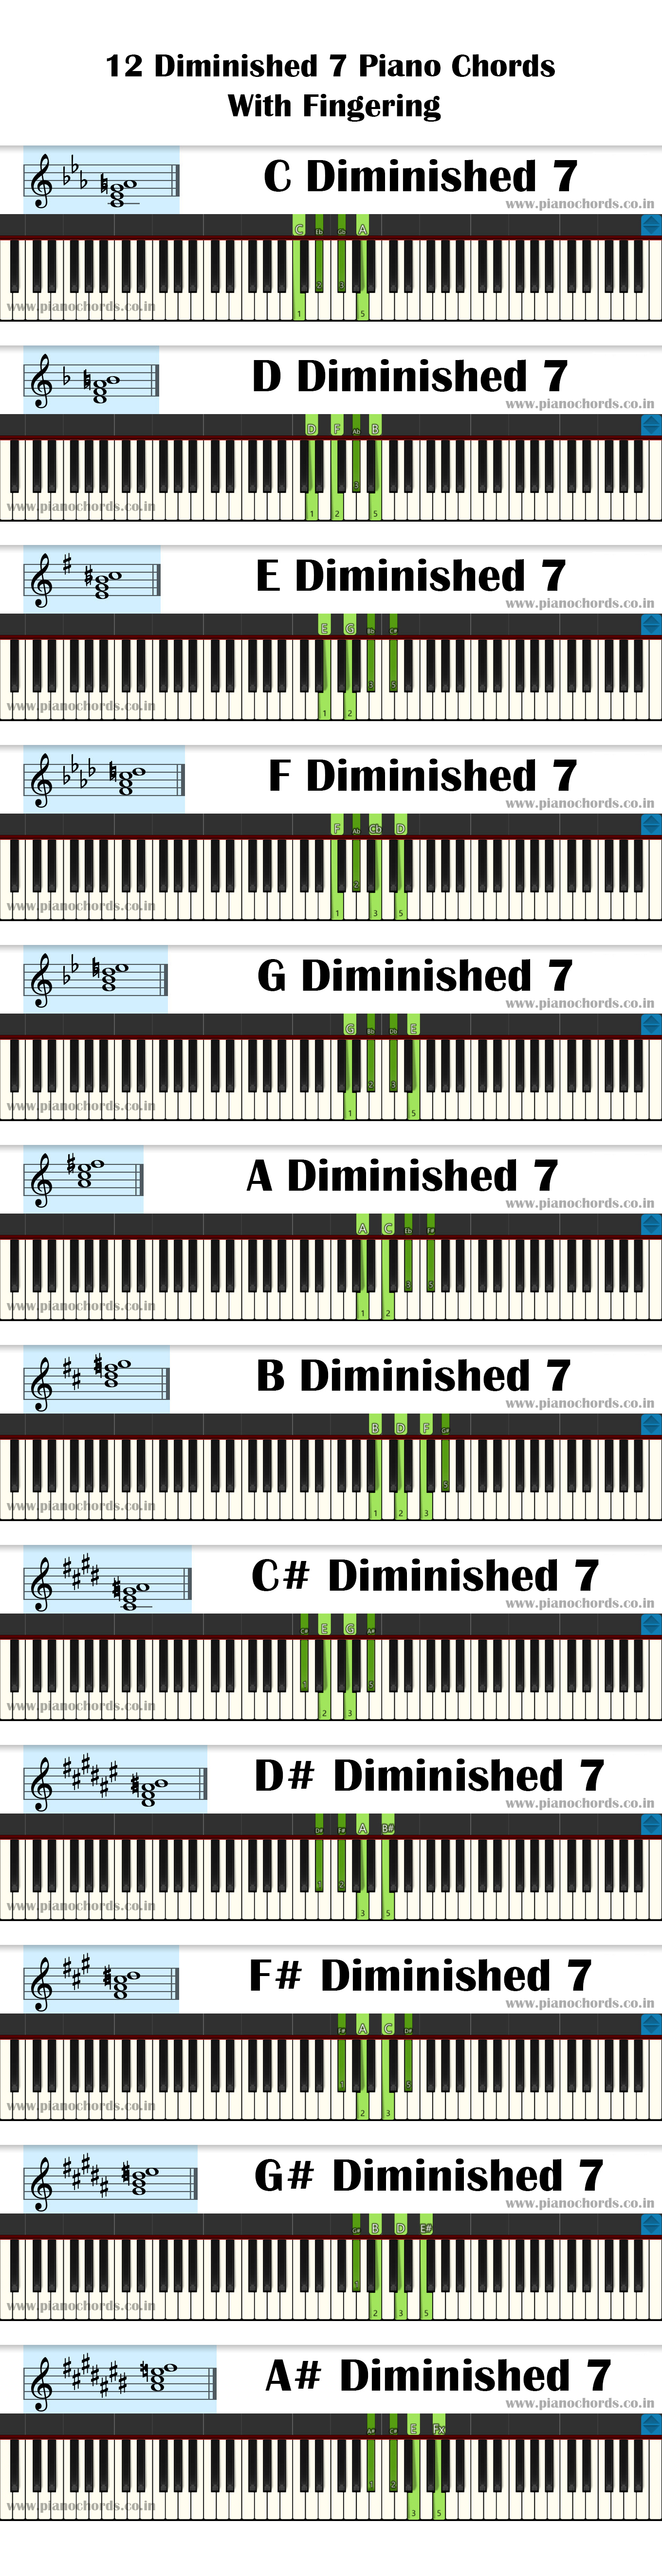 12 Diminished 7 Piano Chords With Fingering, Diagram, Staff Notation